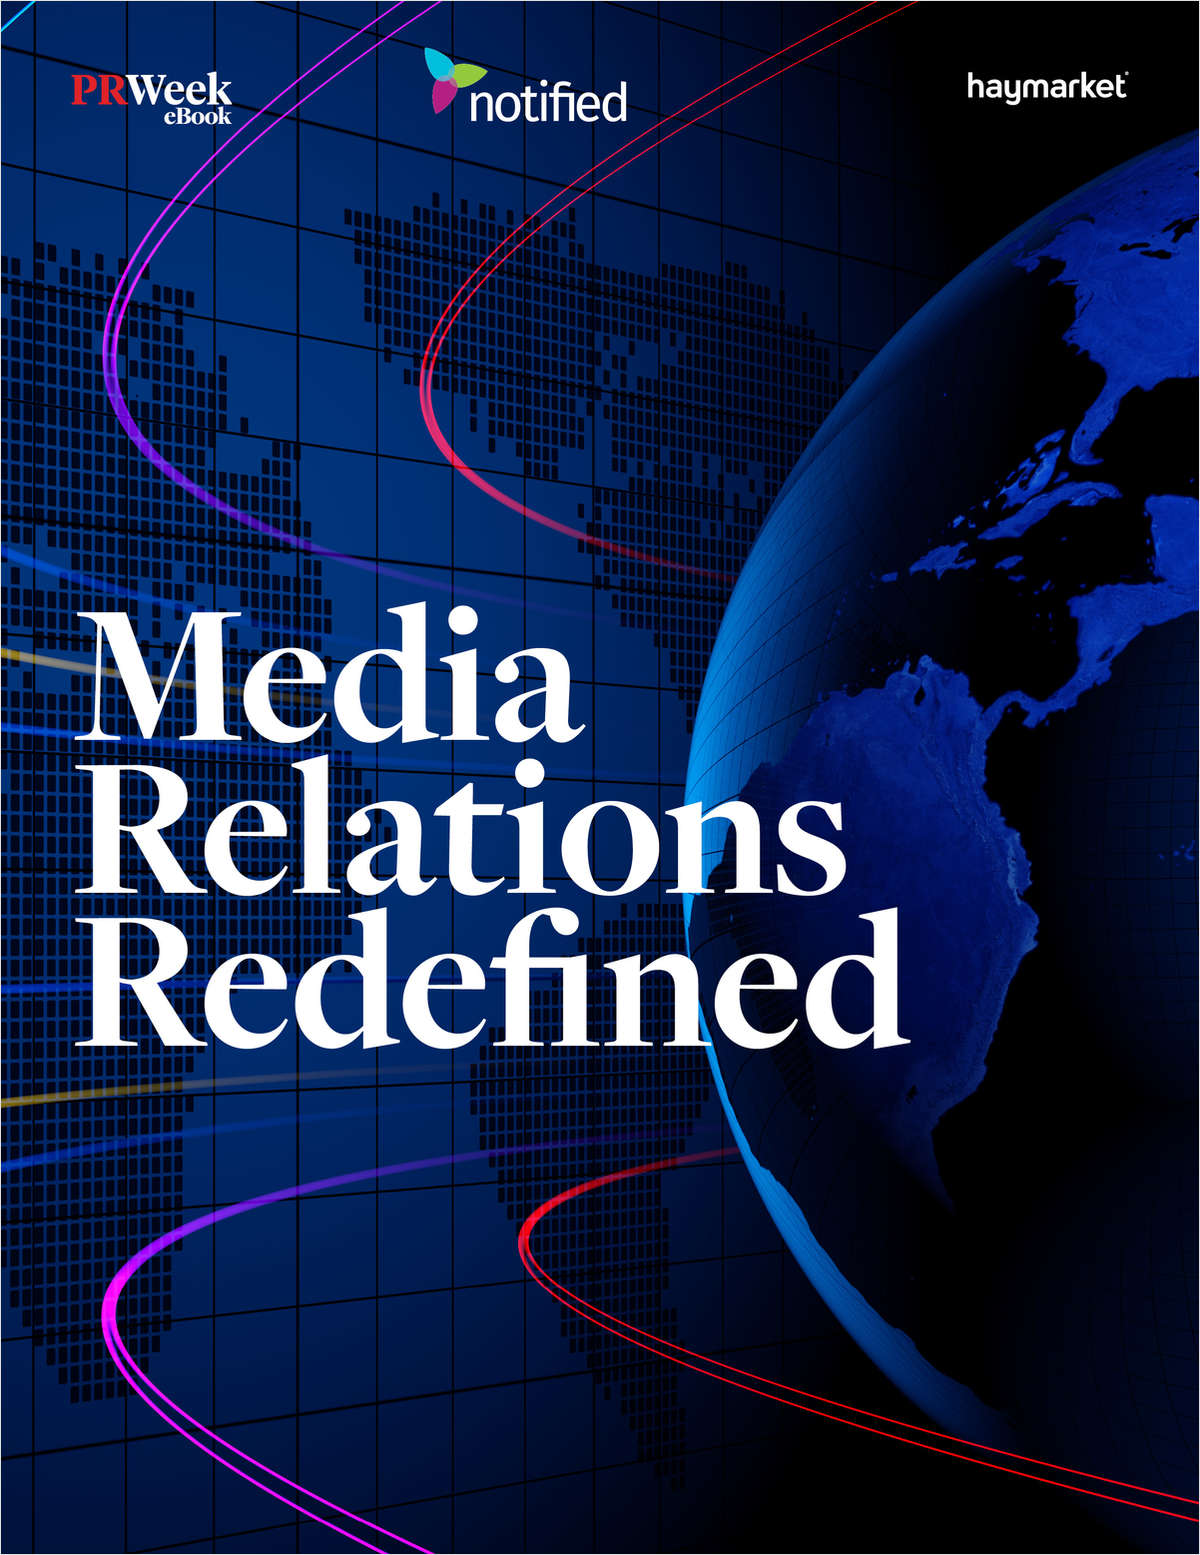 Media Relations Redefined